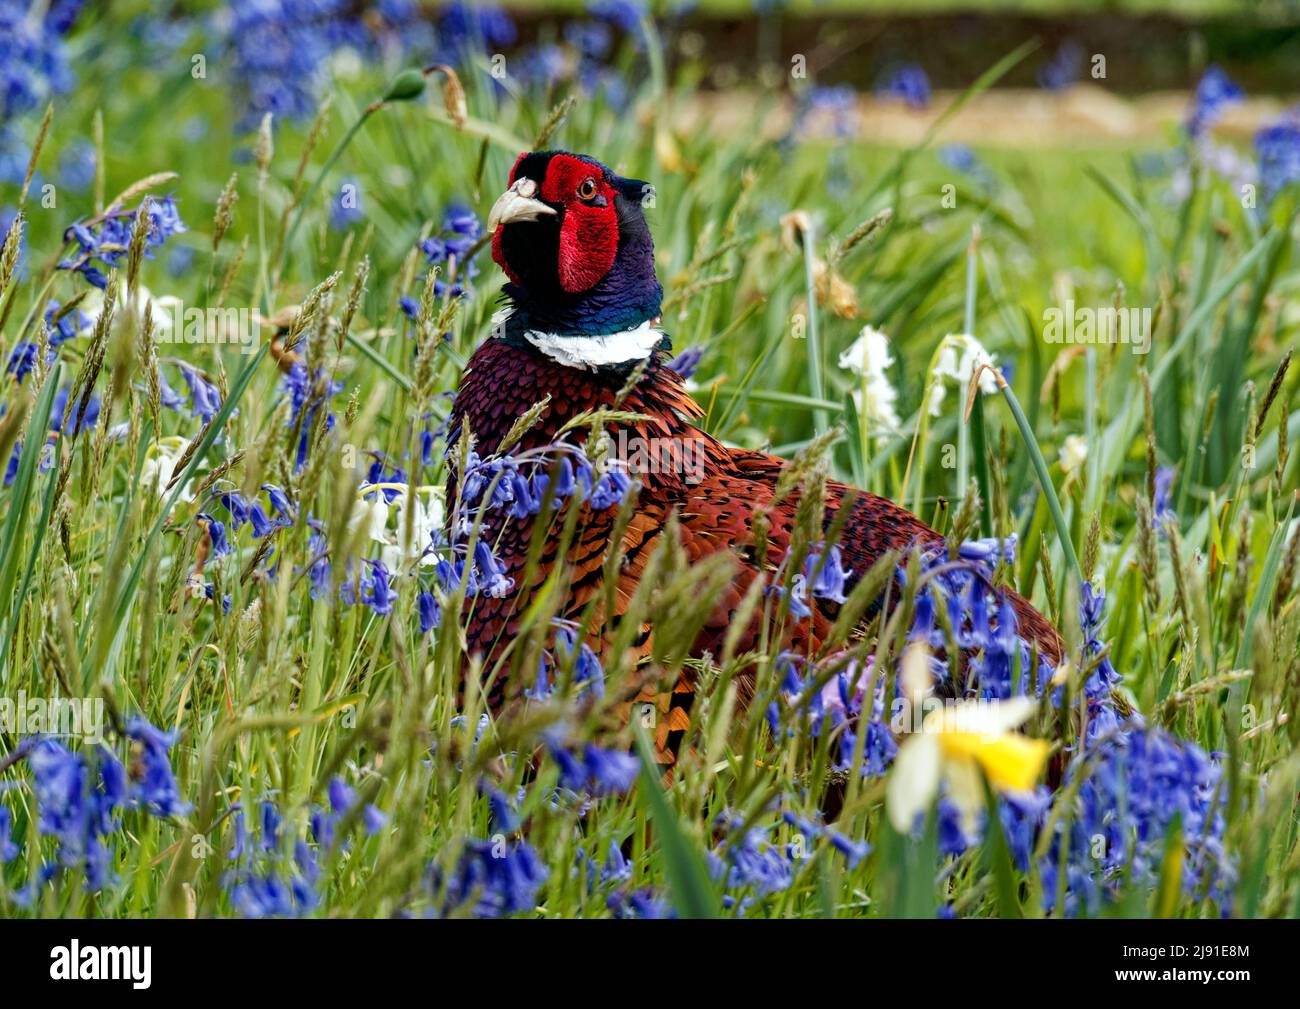 Male pheasant seen amongst grass and bluebells. Pheasants are an introduced gamebird species common in England. Stock Photo